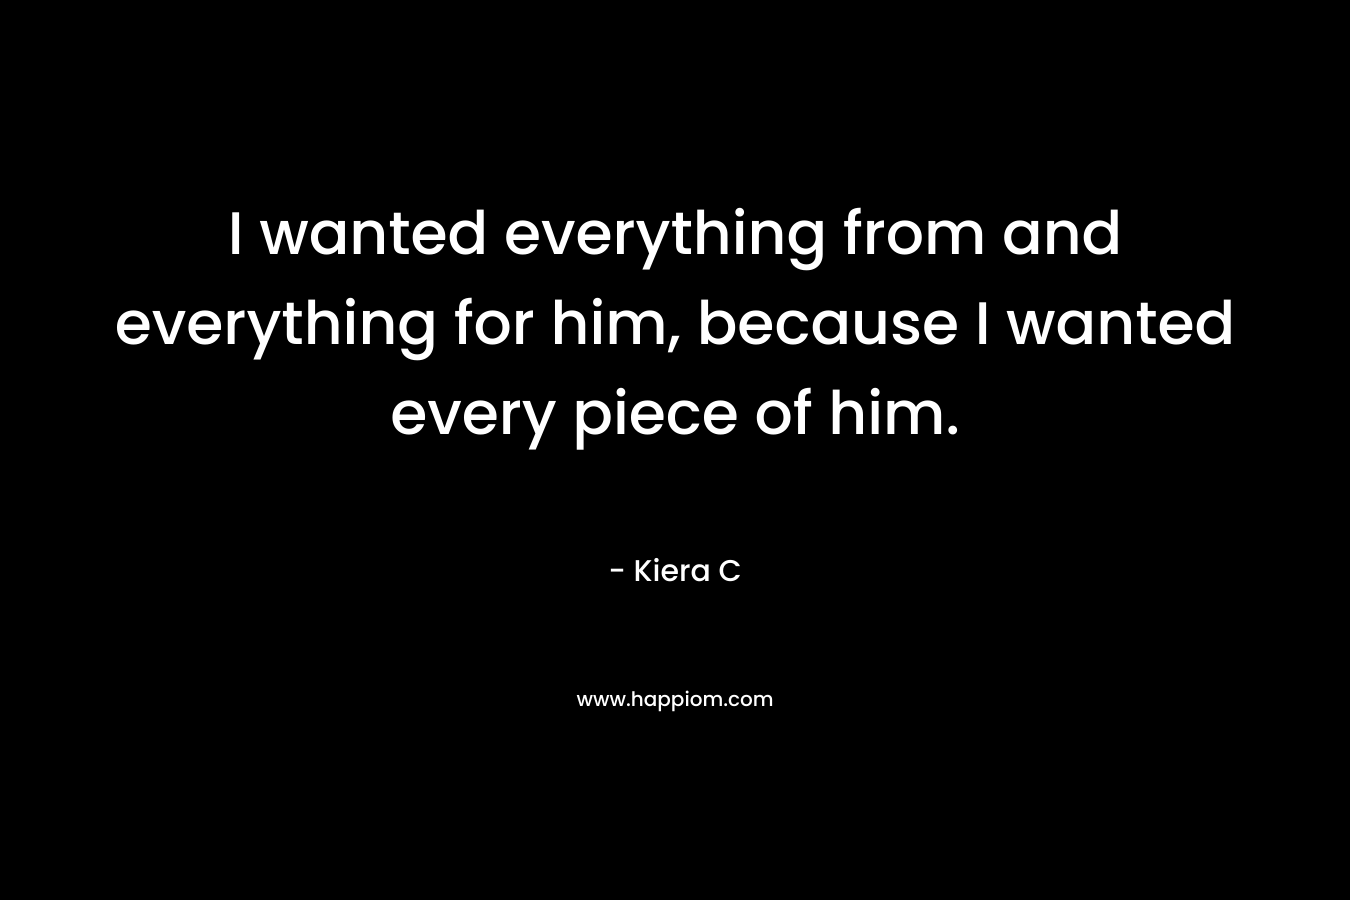 I wanted everything from and everything for him, because I wanted every piece of him.